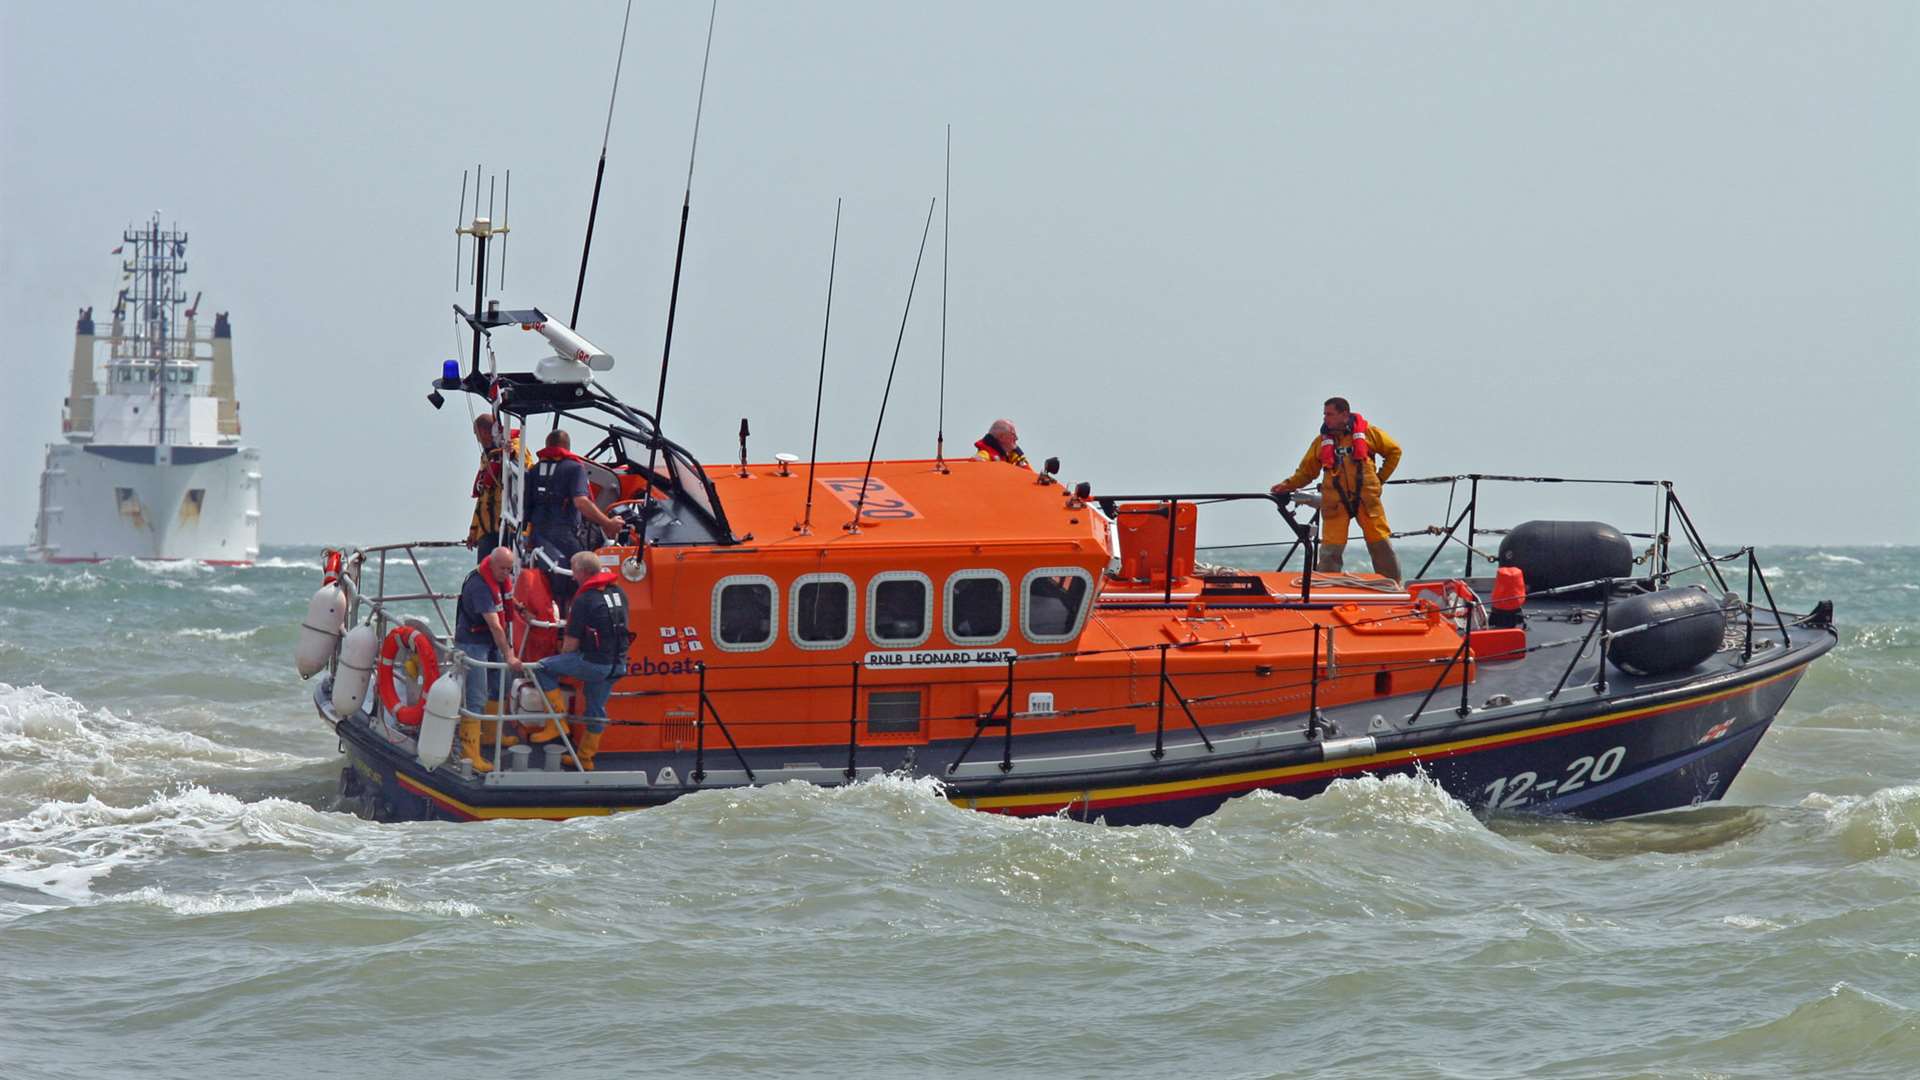 The all weather lifeboat. Pic from the RNLI